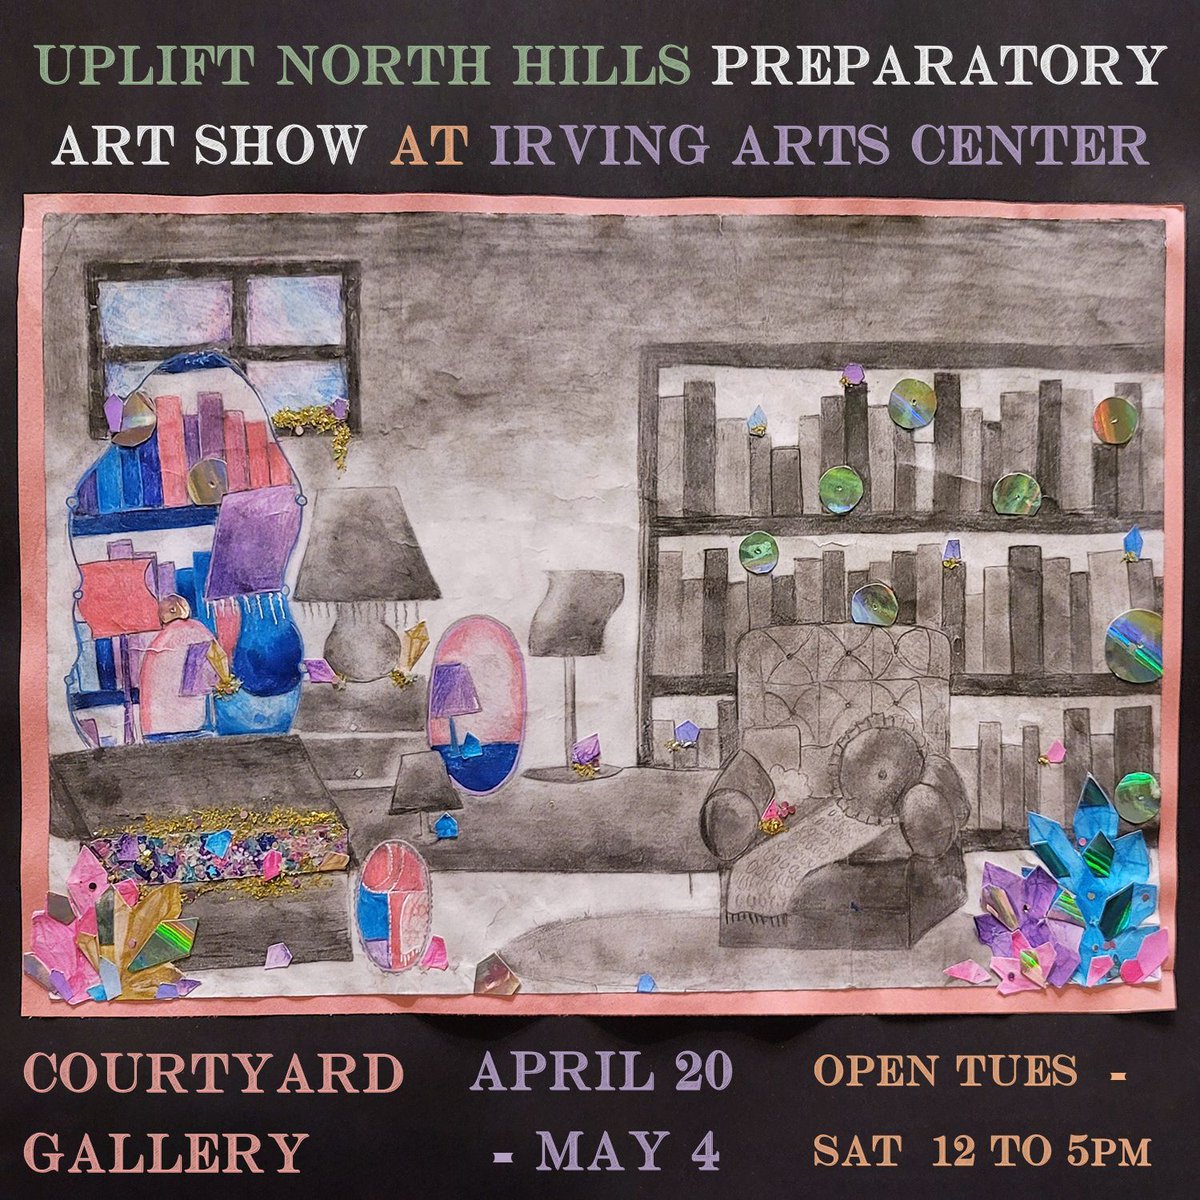 See the artwork of the talented students at Uplift North Hills Preparatory! Up in our Courtyard gallery on April 20th! #studentart #upliftpreparatory #irvingtx #irvingarts